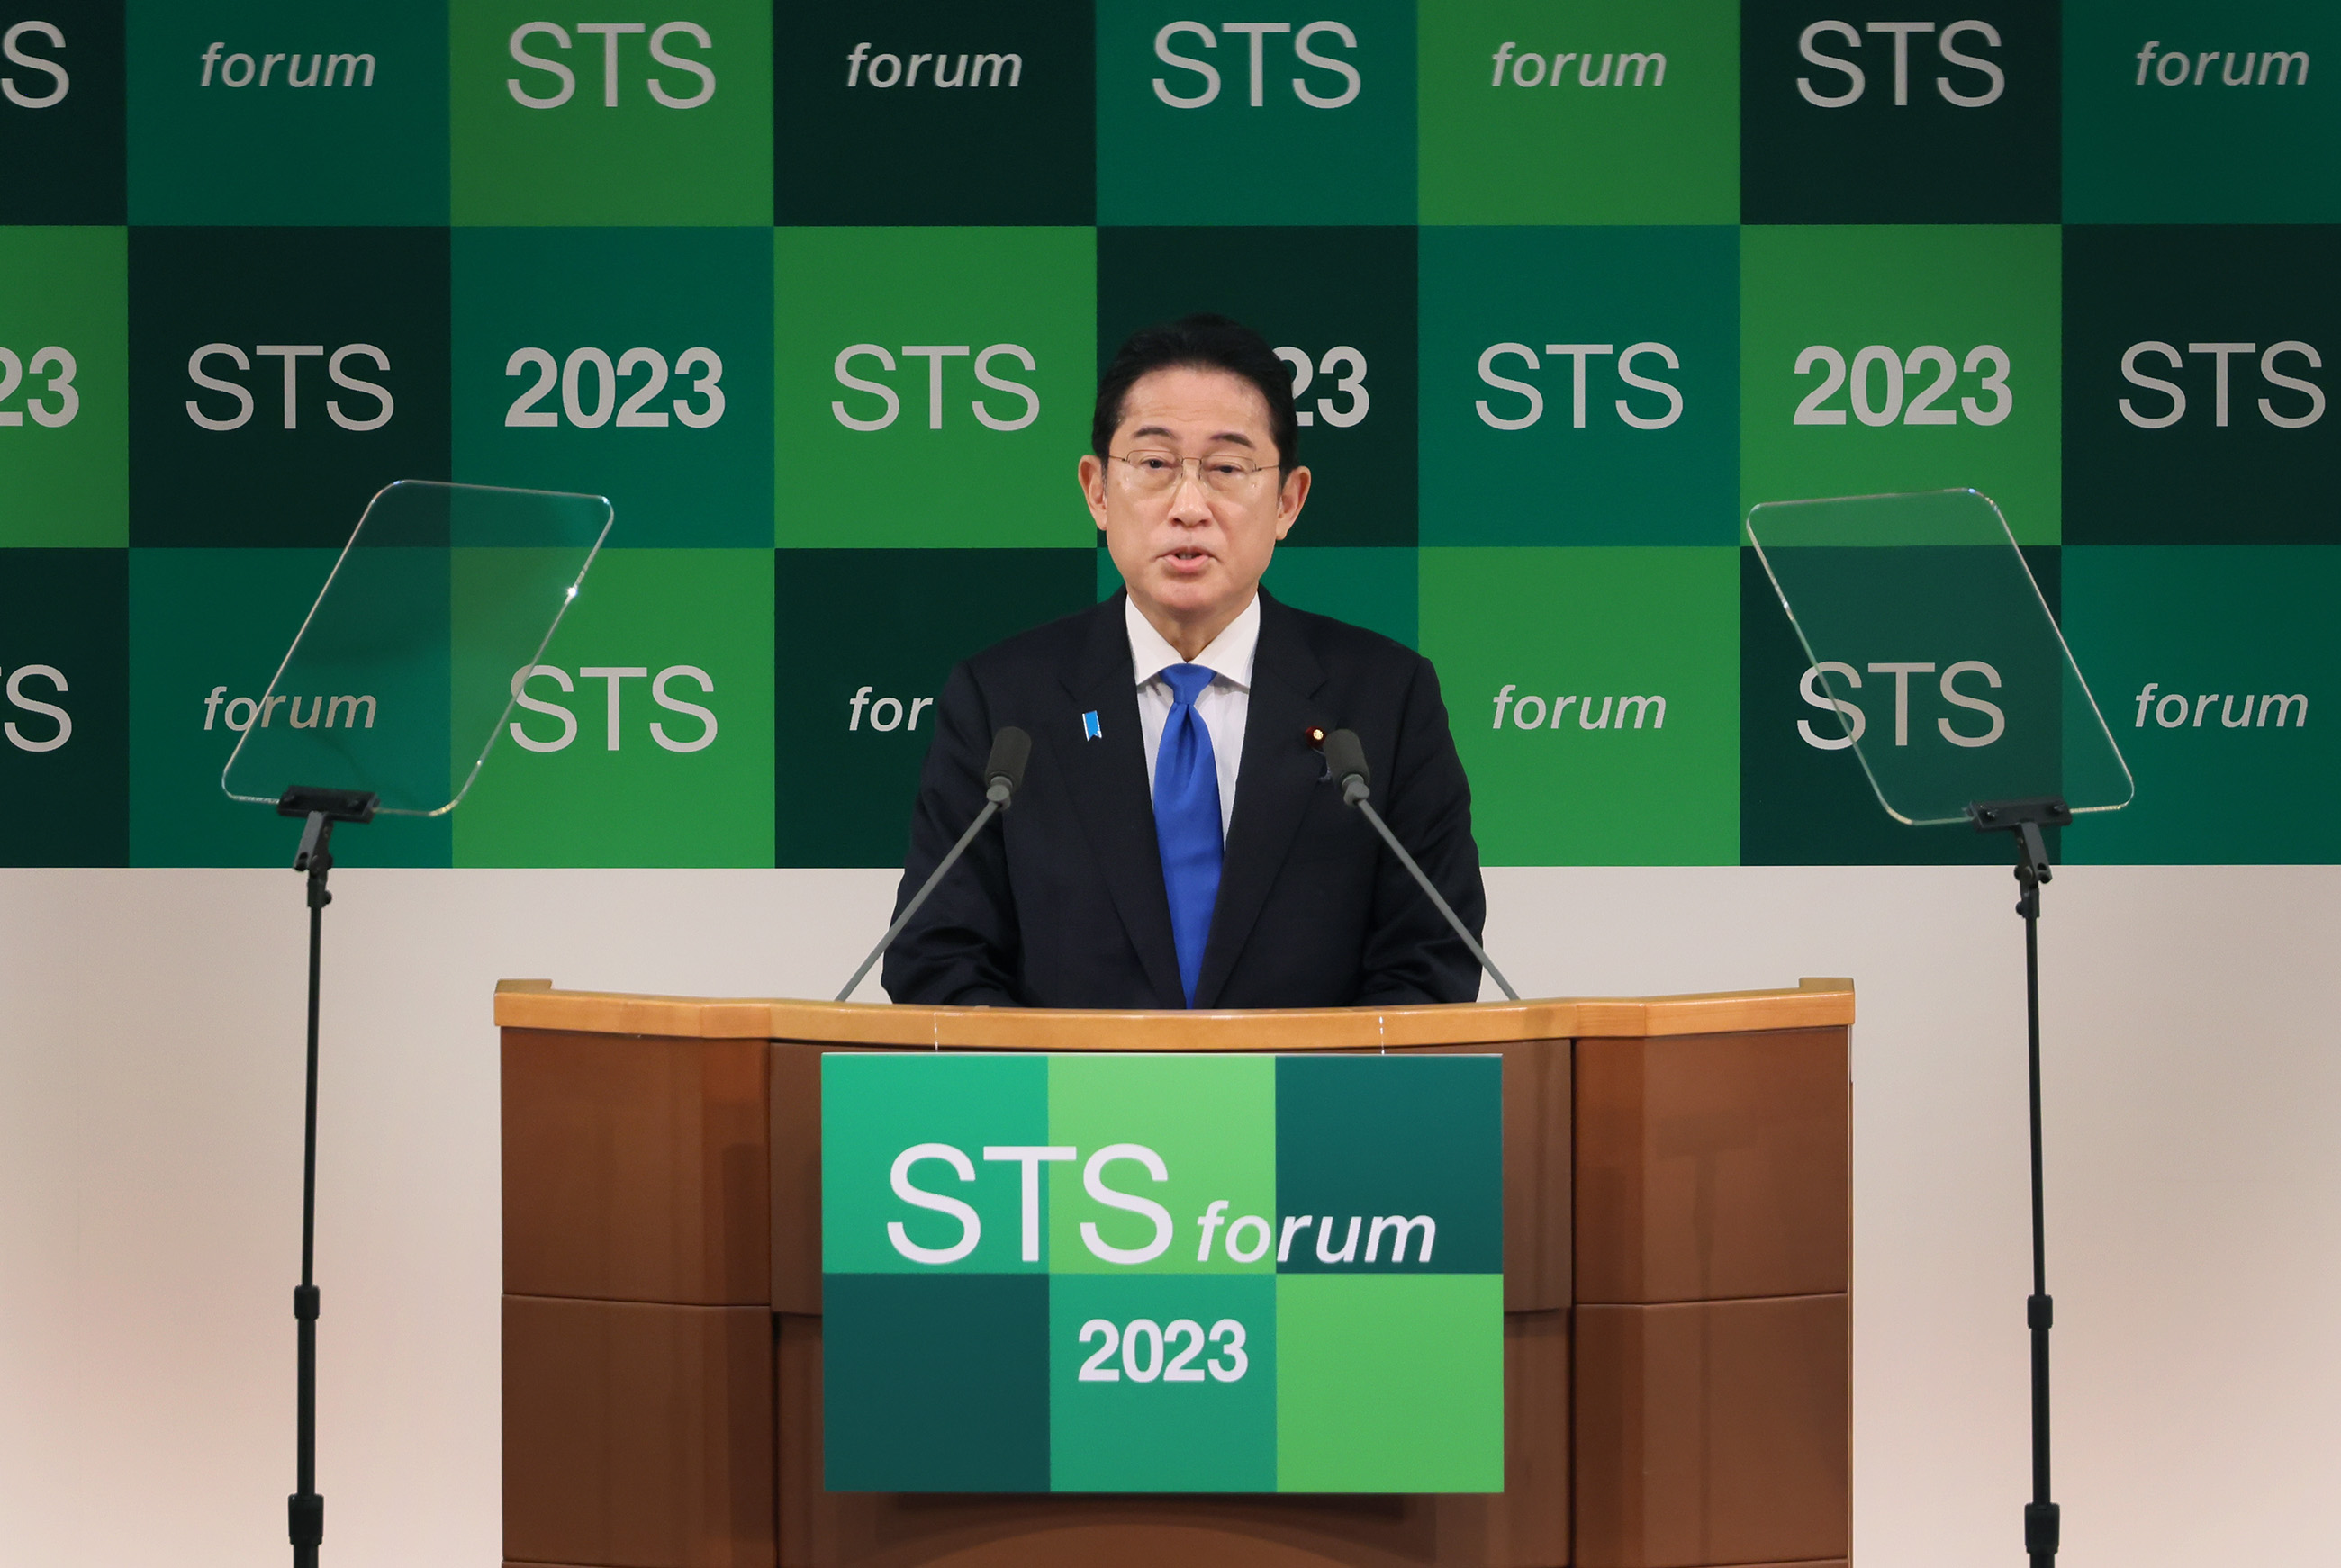 Prime Minister Kishida delivering an address at the opening ceremony (5)